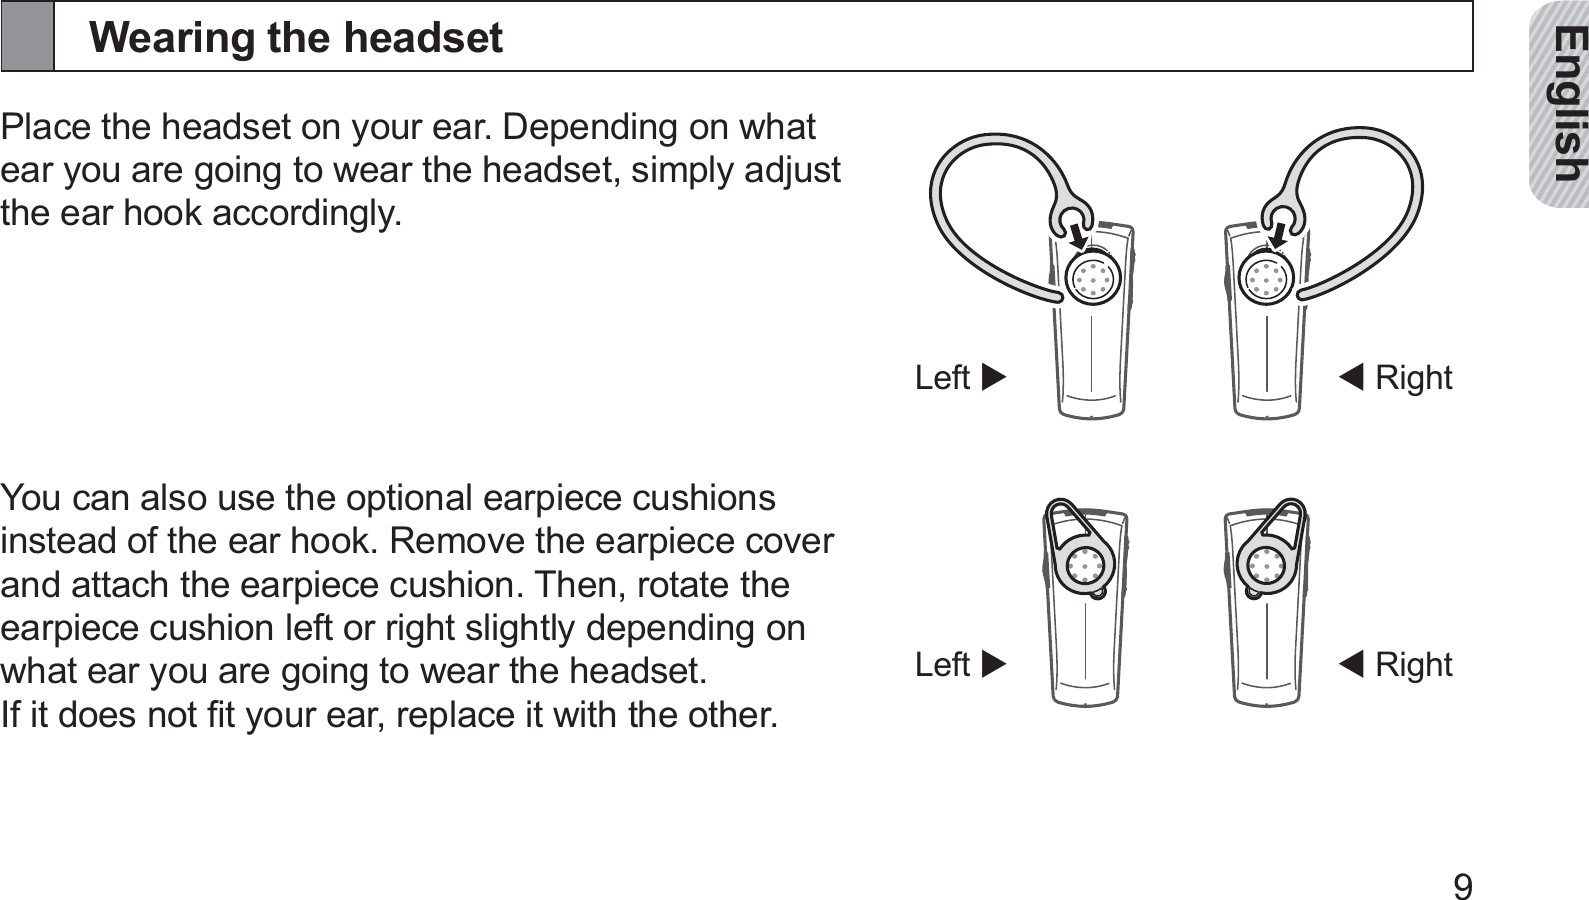 English9Wearing the headsetPlace the headset on your ear. Depending on what ear you are going to wear the headset, simply adjust the ear hook accordingly.You can also use the optional earpiece cushions instead of the ear hook. Remove the earpiece cover and attach the earpiece cushion. Then, rotate the earpiece cushion left or right slightly depending on what ear you are going to wear the headset.  If it does not ﬁt your ear, replace it with the other. RightLeft  RightLeft 